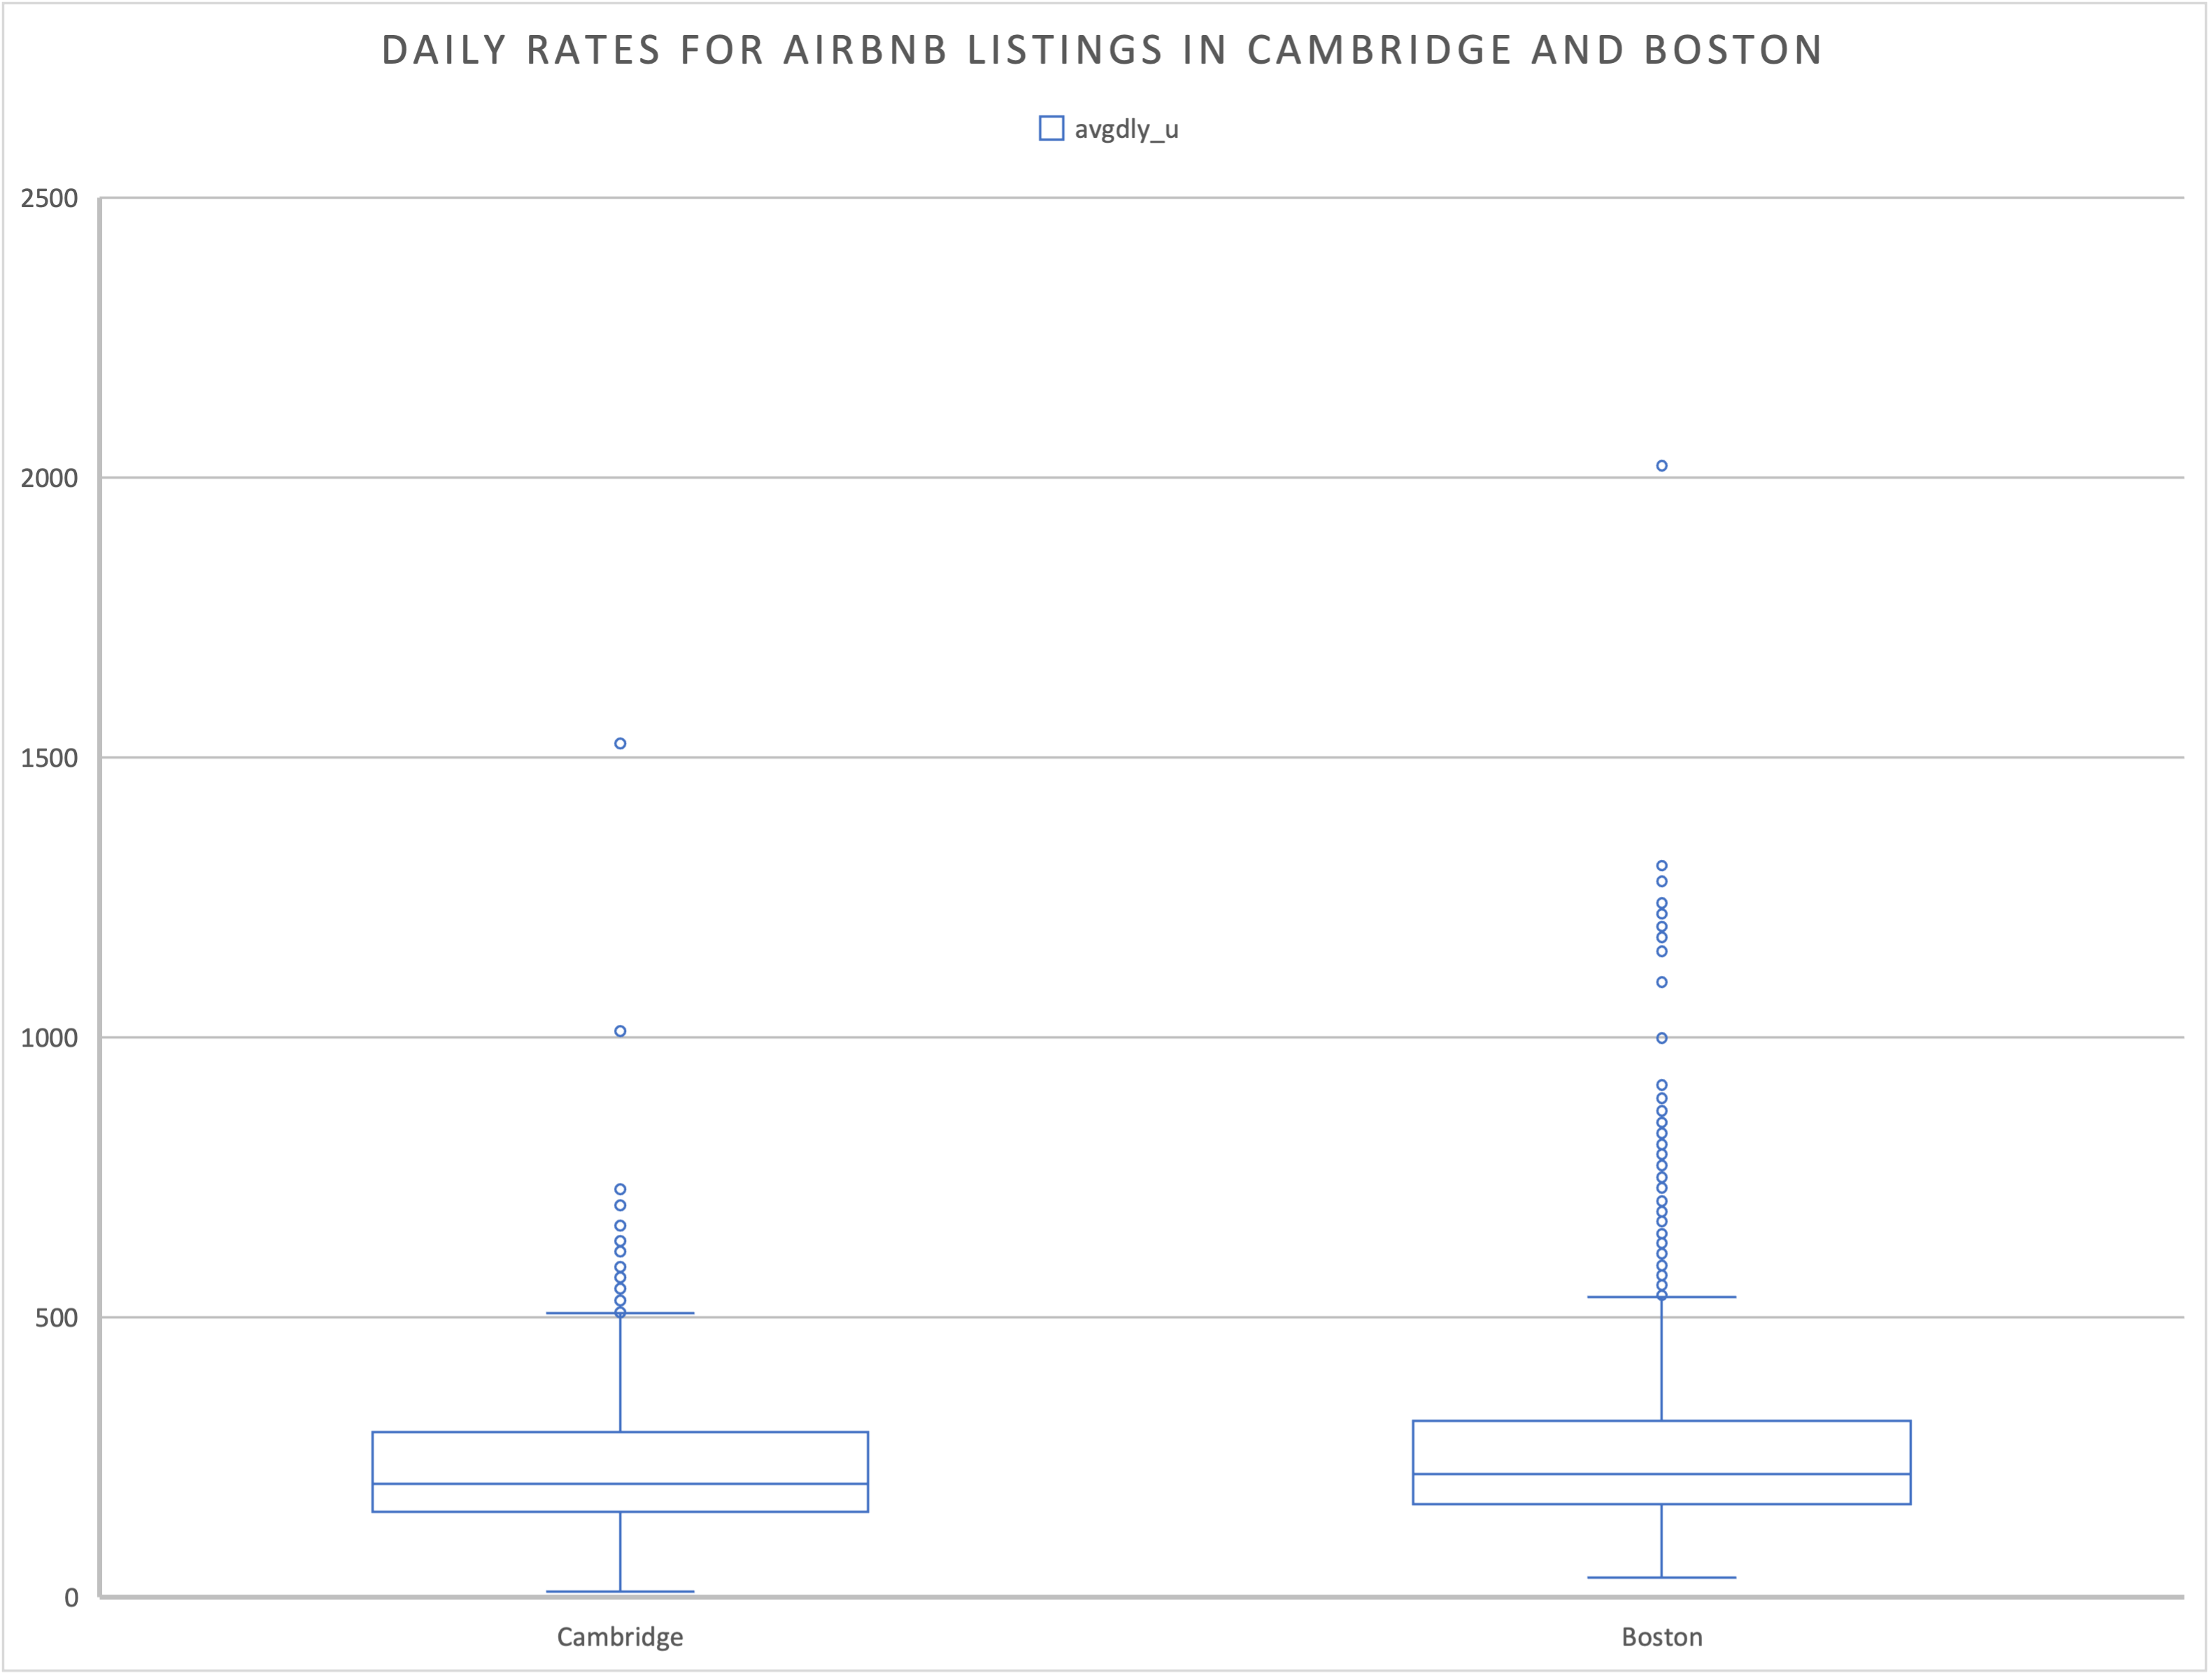 Box and whisker plot of Airbnb rates in Cambridge and Boston